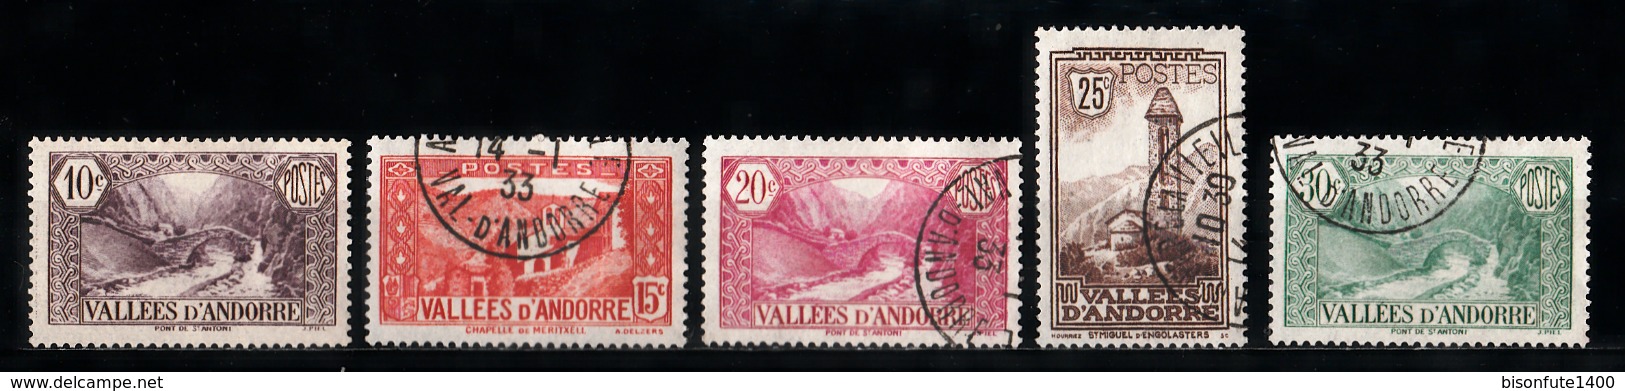 Andorre Français 1932 - 1933 : Timbres Yvert & Tellier N° 24 - 25 - 26 - 27 - 28 - 29 - 30 - 31 - 32 - 33 - 34 - 35 - .. - Used Stamps